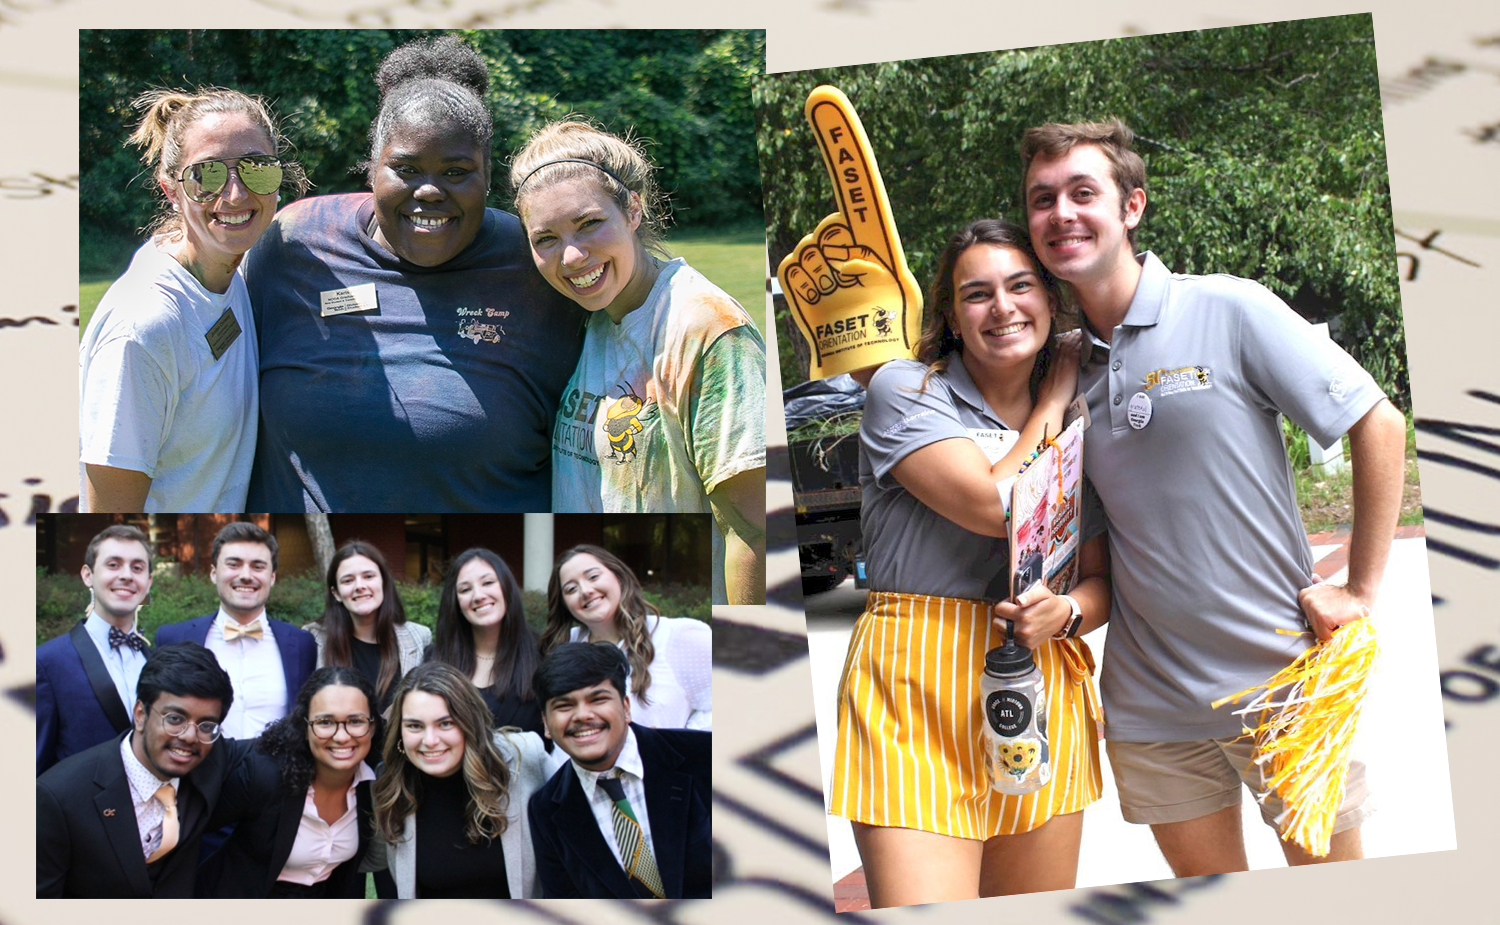 Collage of FASET, Camp Wreck, and Council leaders.